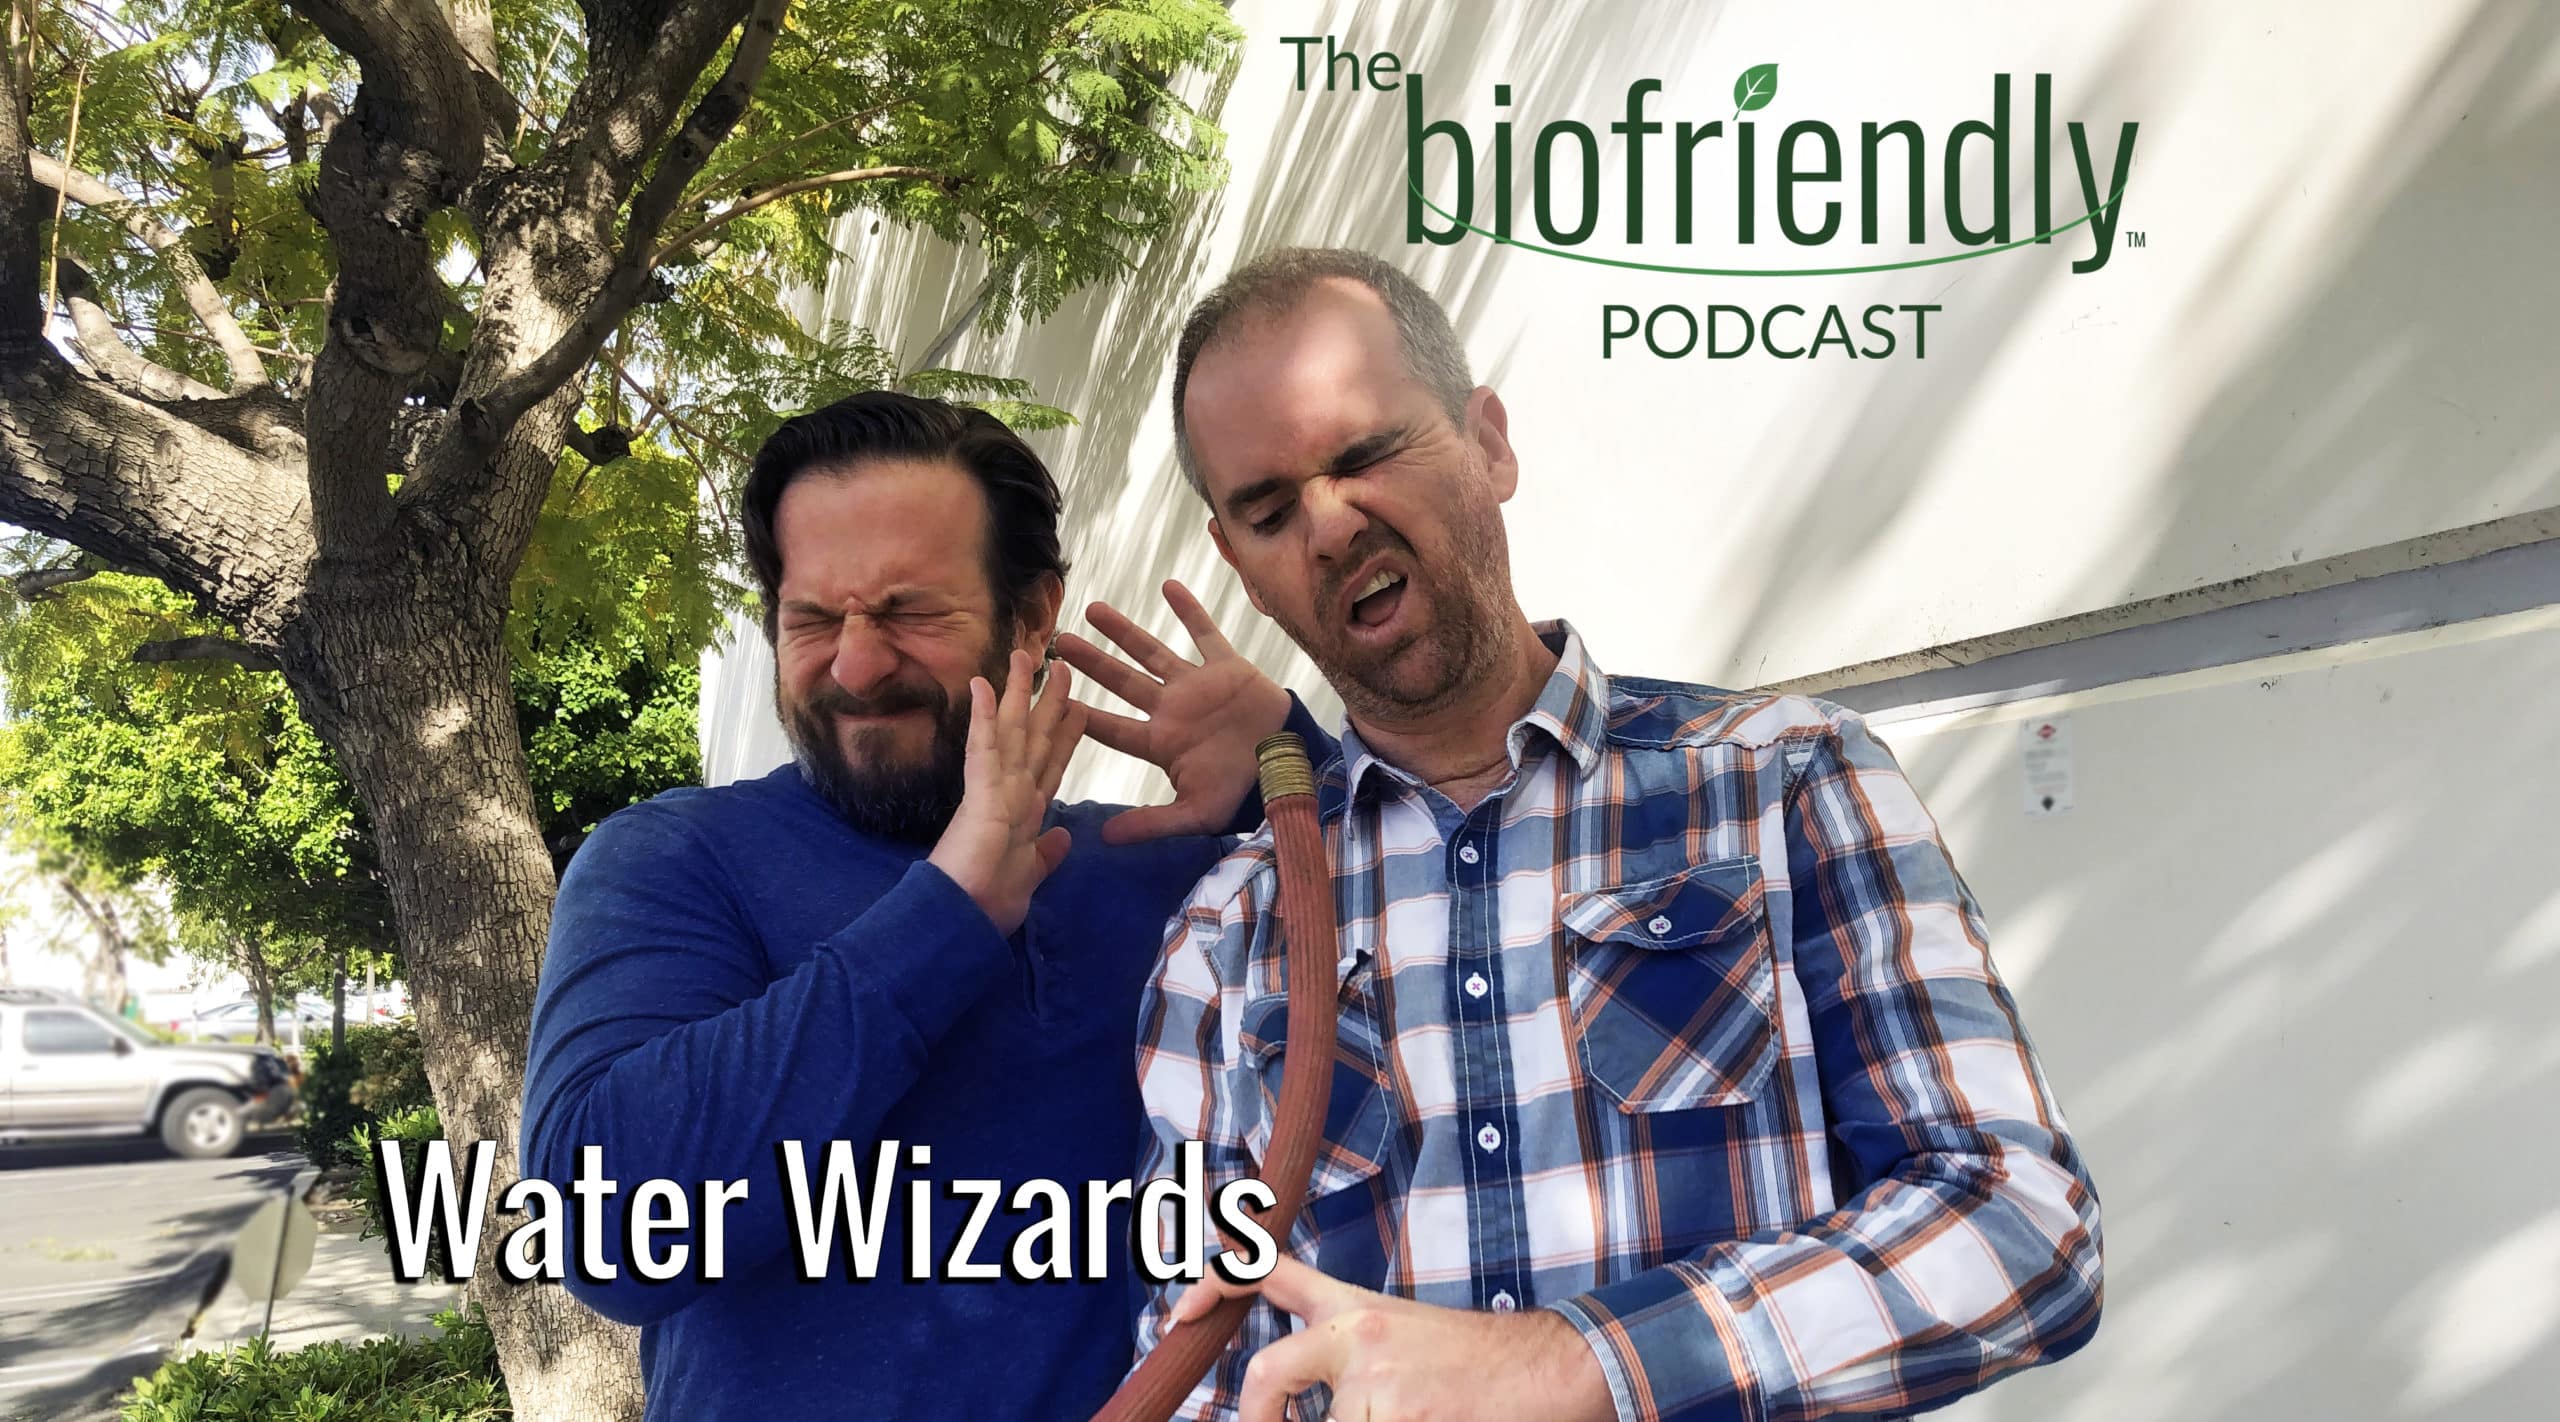 The Biofriendly Podcast - Episode 5 - Water Wizards